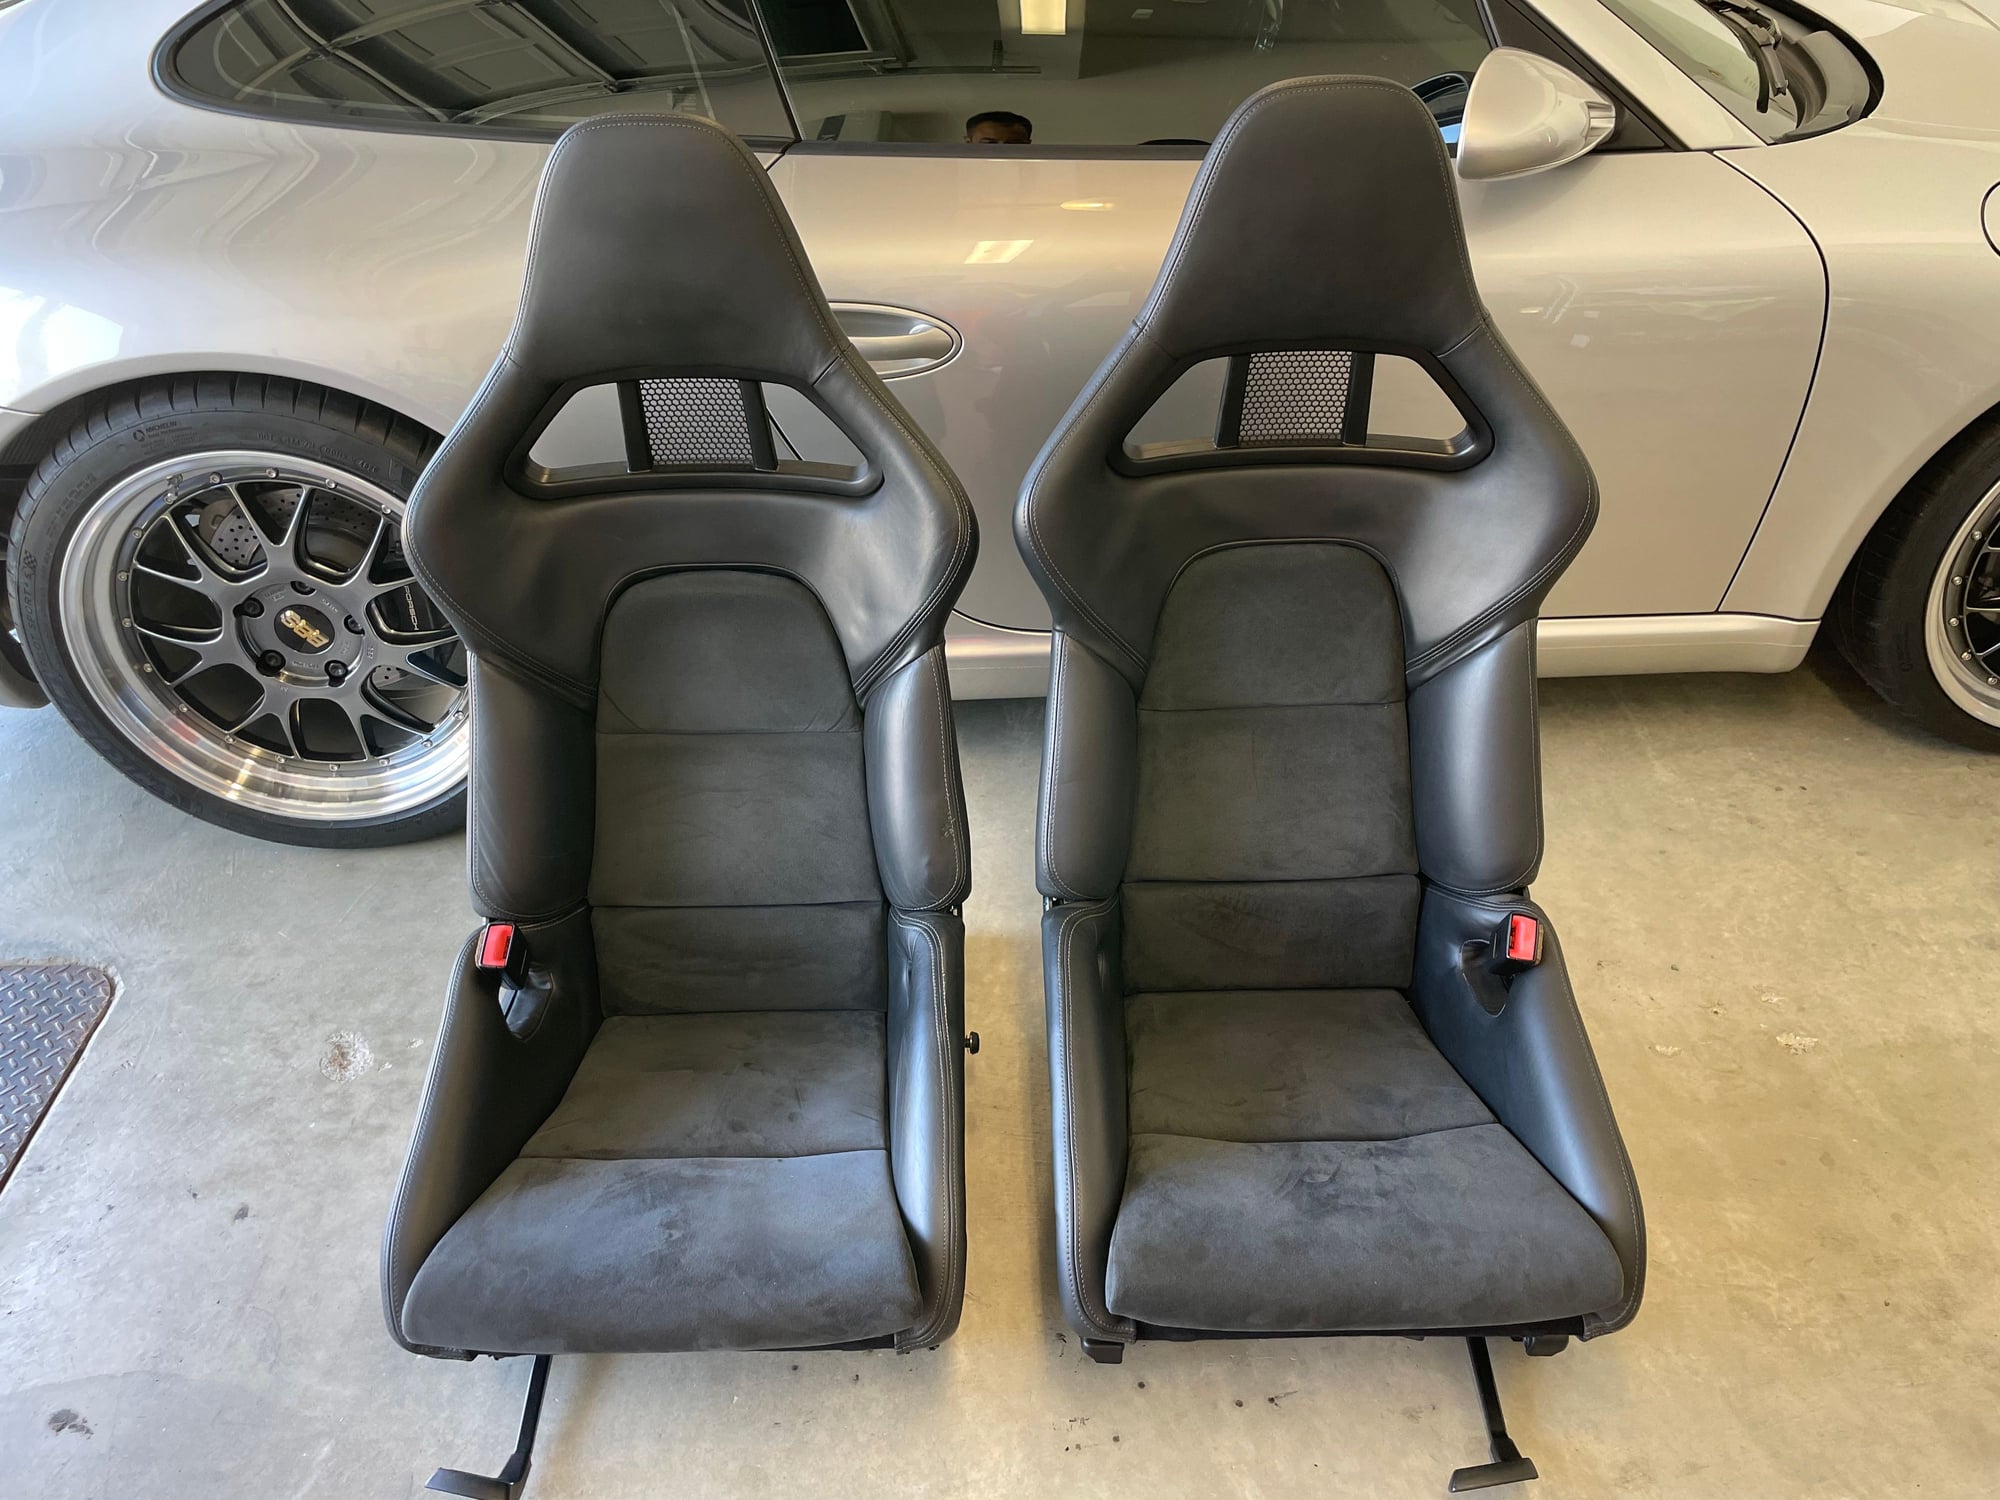 Interior/Upholstery - GT2/GT3 Lightweight Bucket Seats - Used - 2005 to 2012 Porsche 911 - City Of Industry, CA 91789, United States